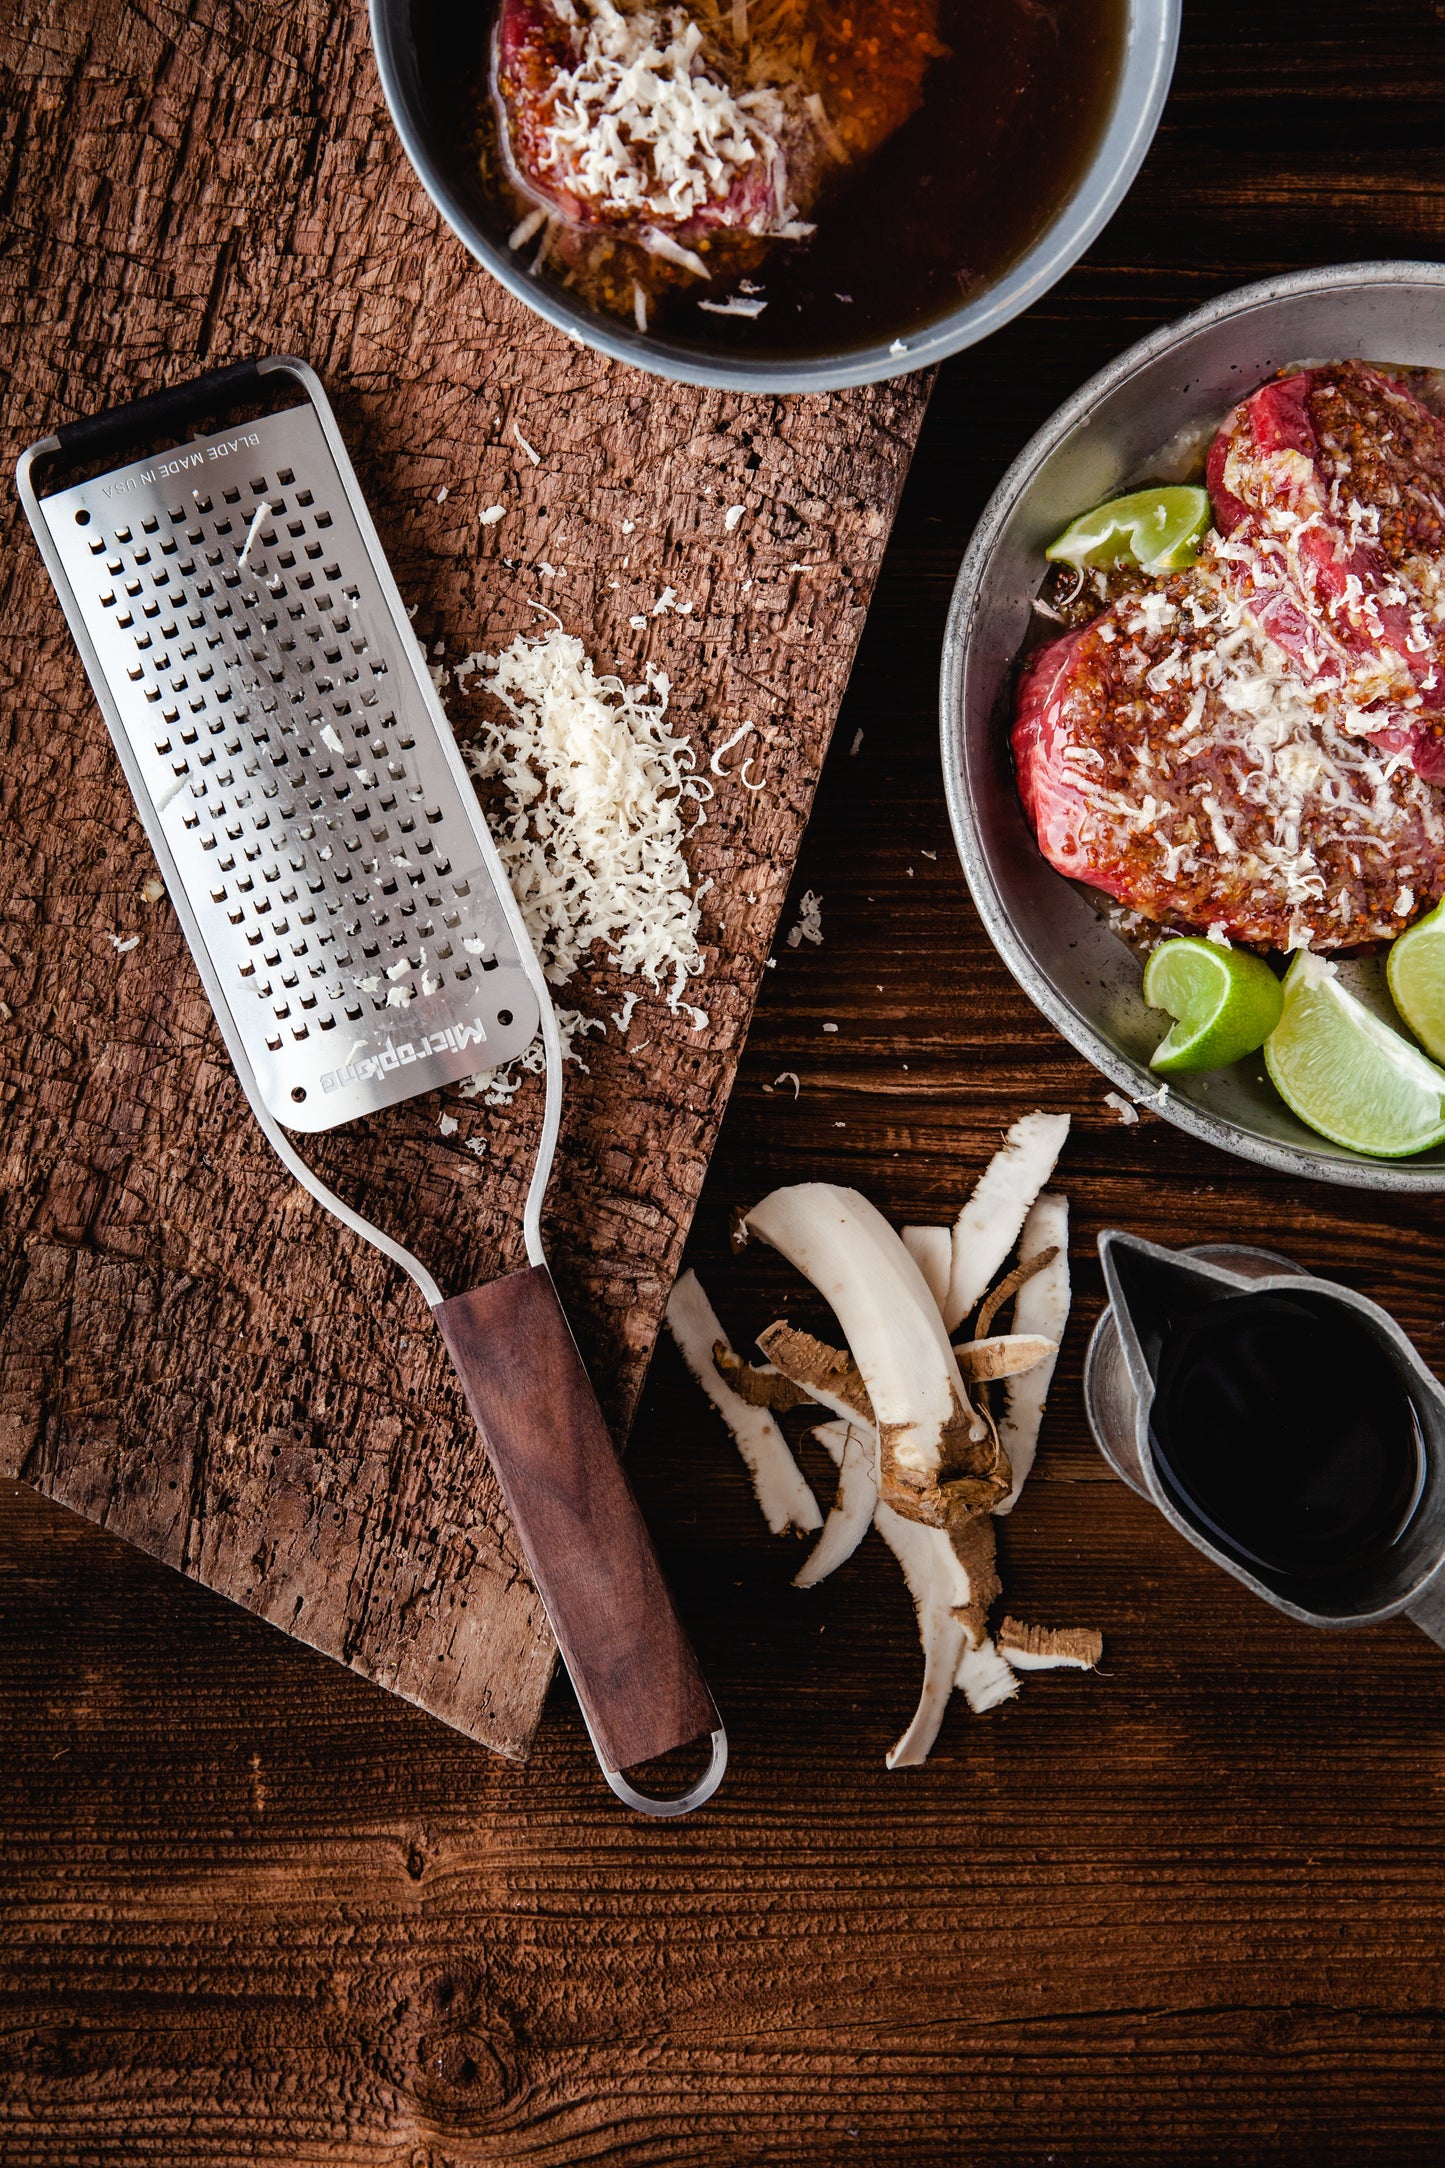 Master grater #3 coarse from Microplane